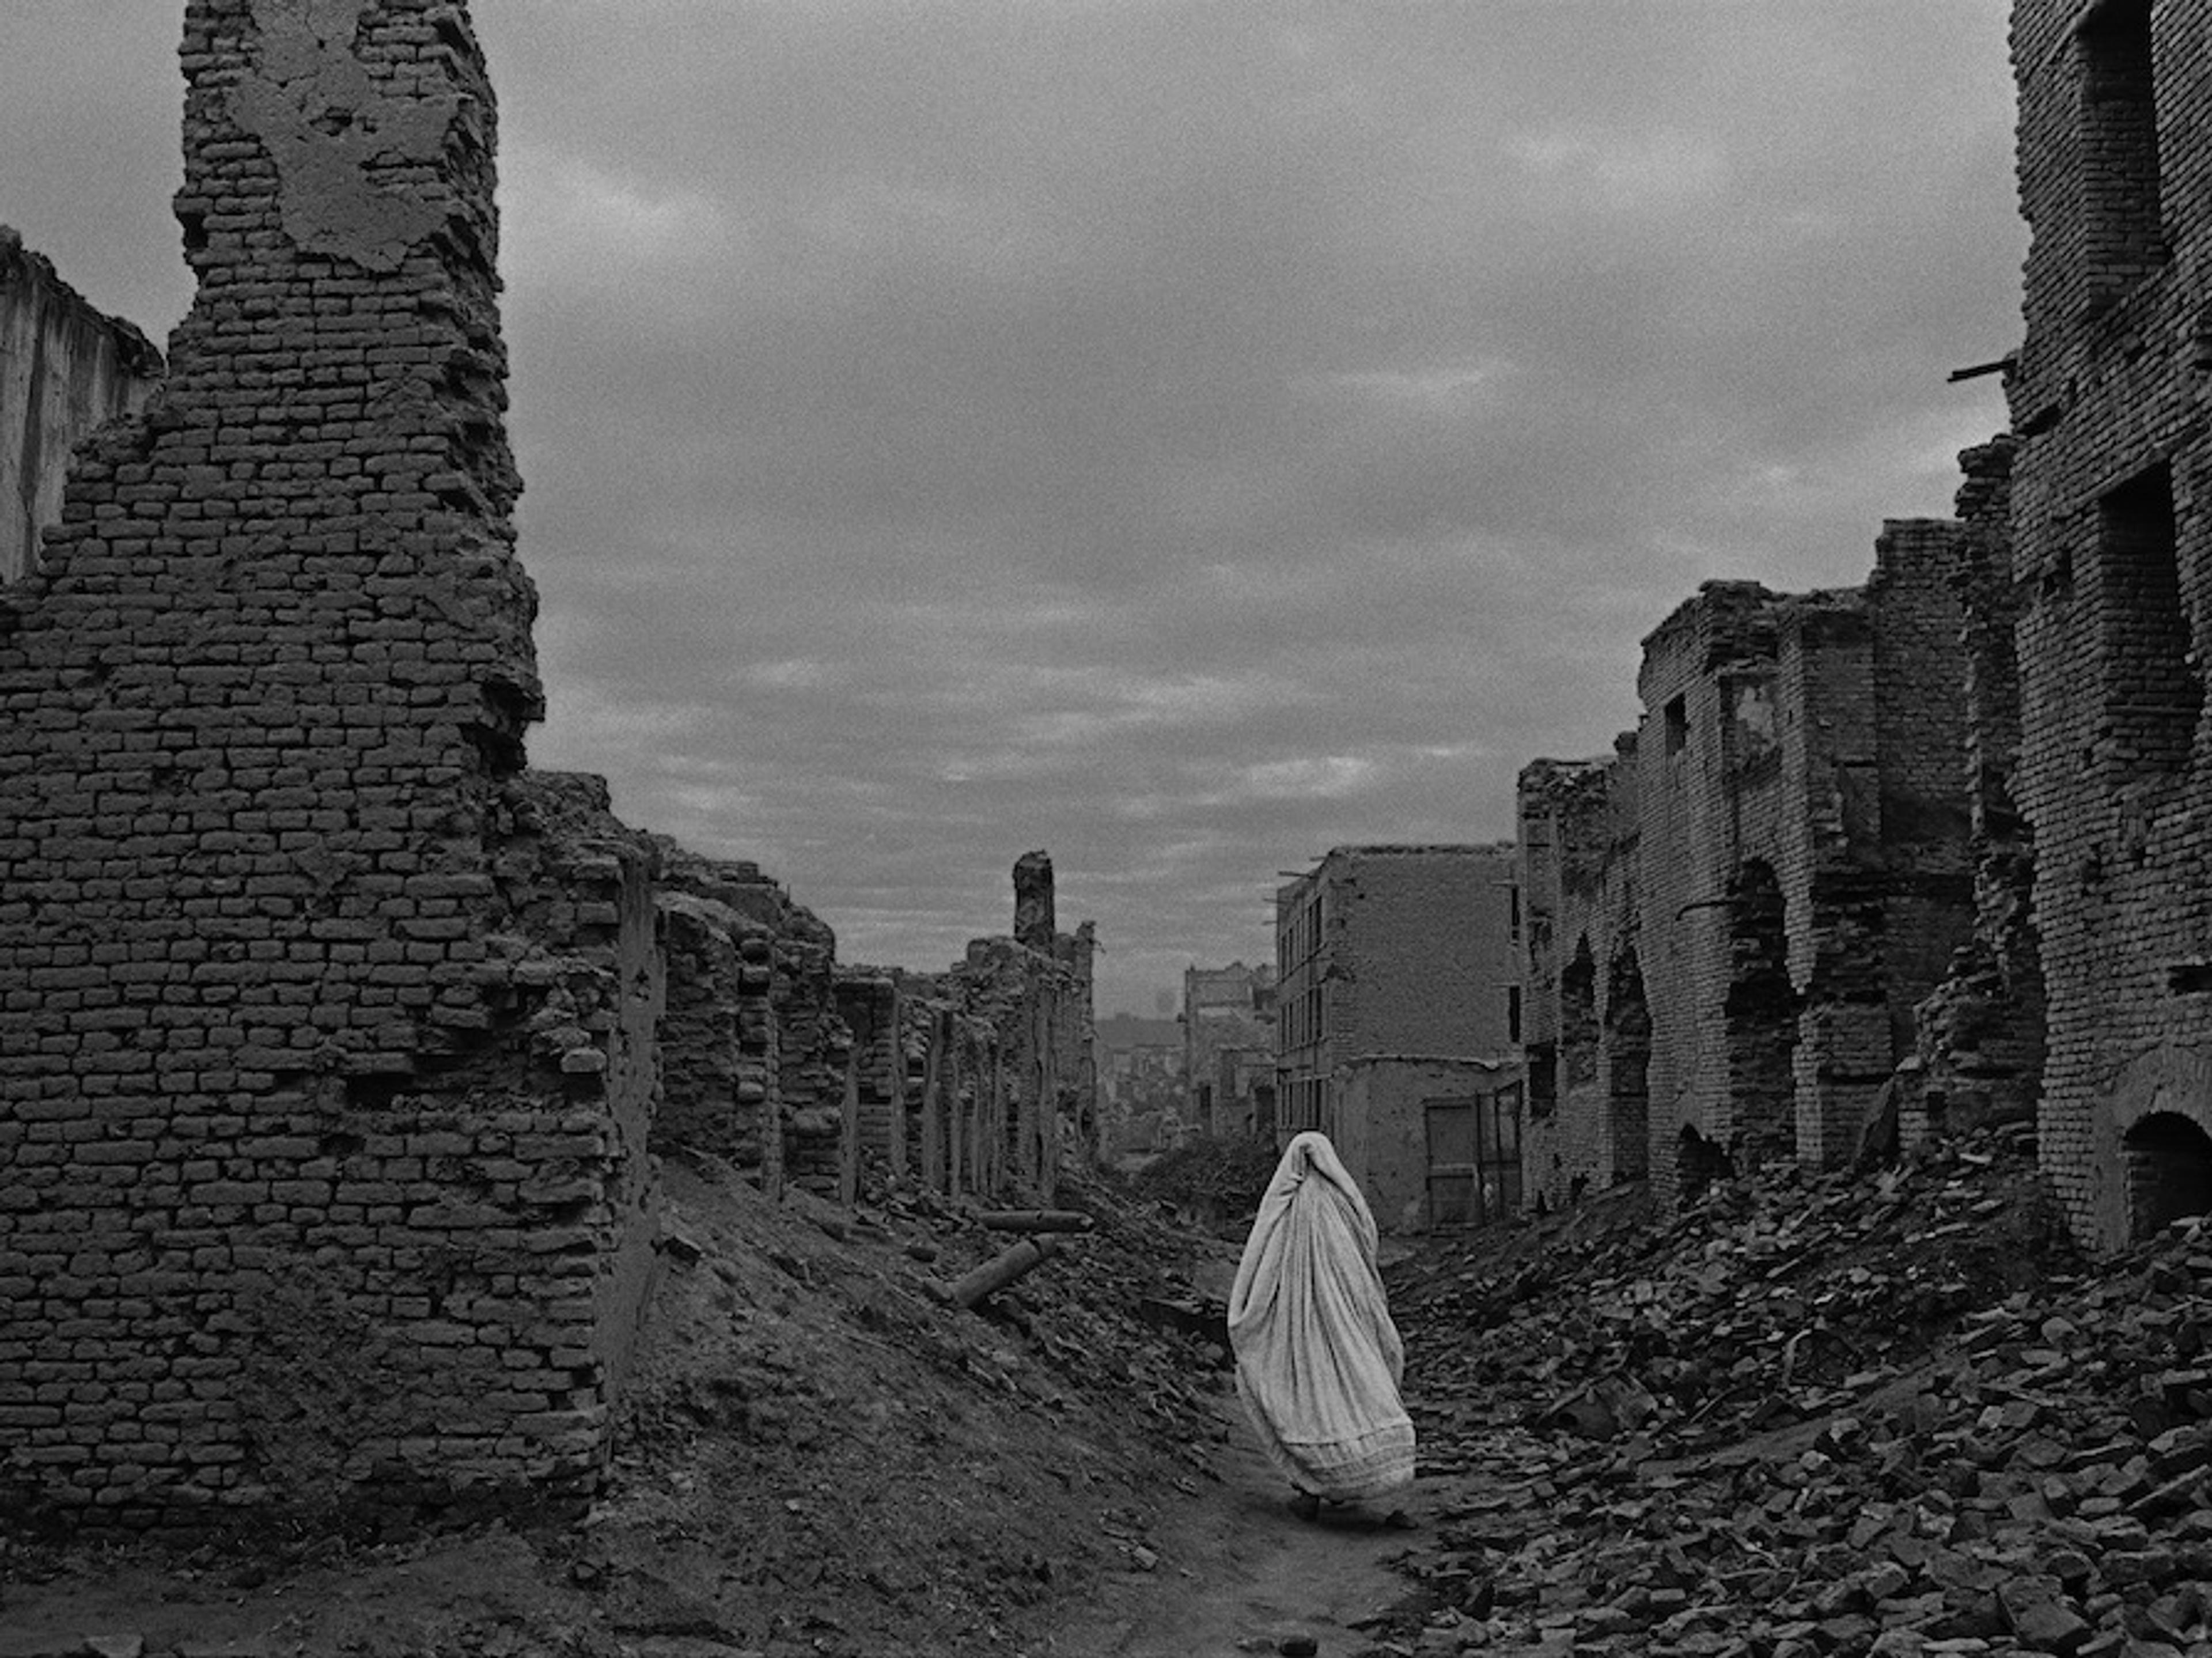 A black-and-white photograph of a figure walking through a desolate landscape, wearing a white, flowing robe